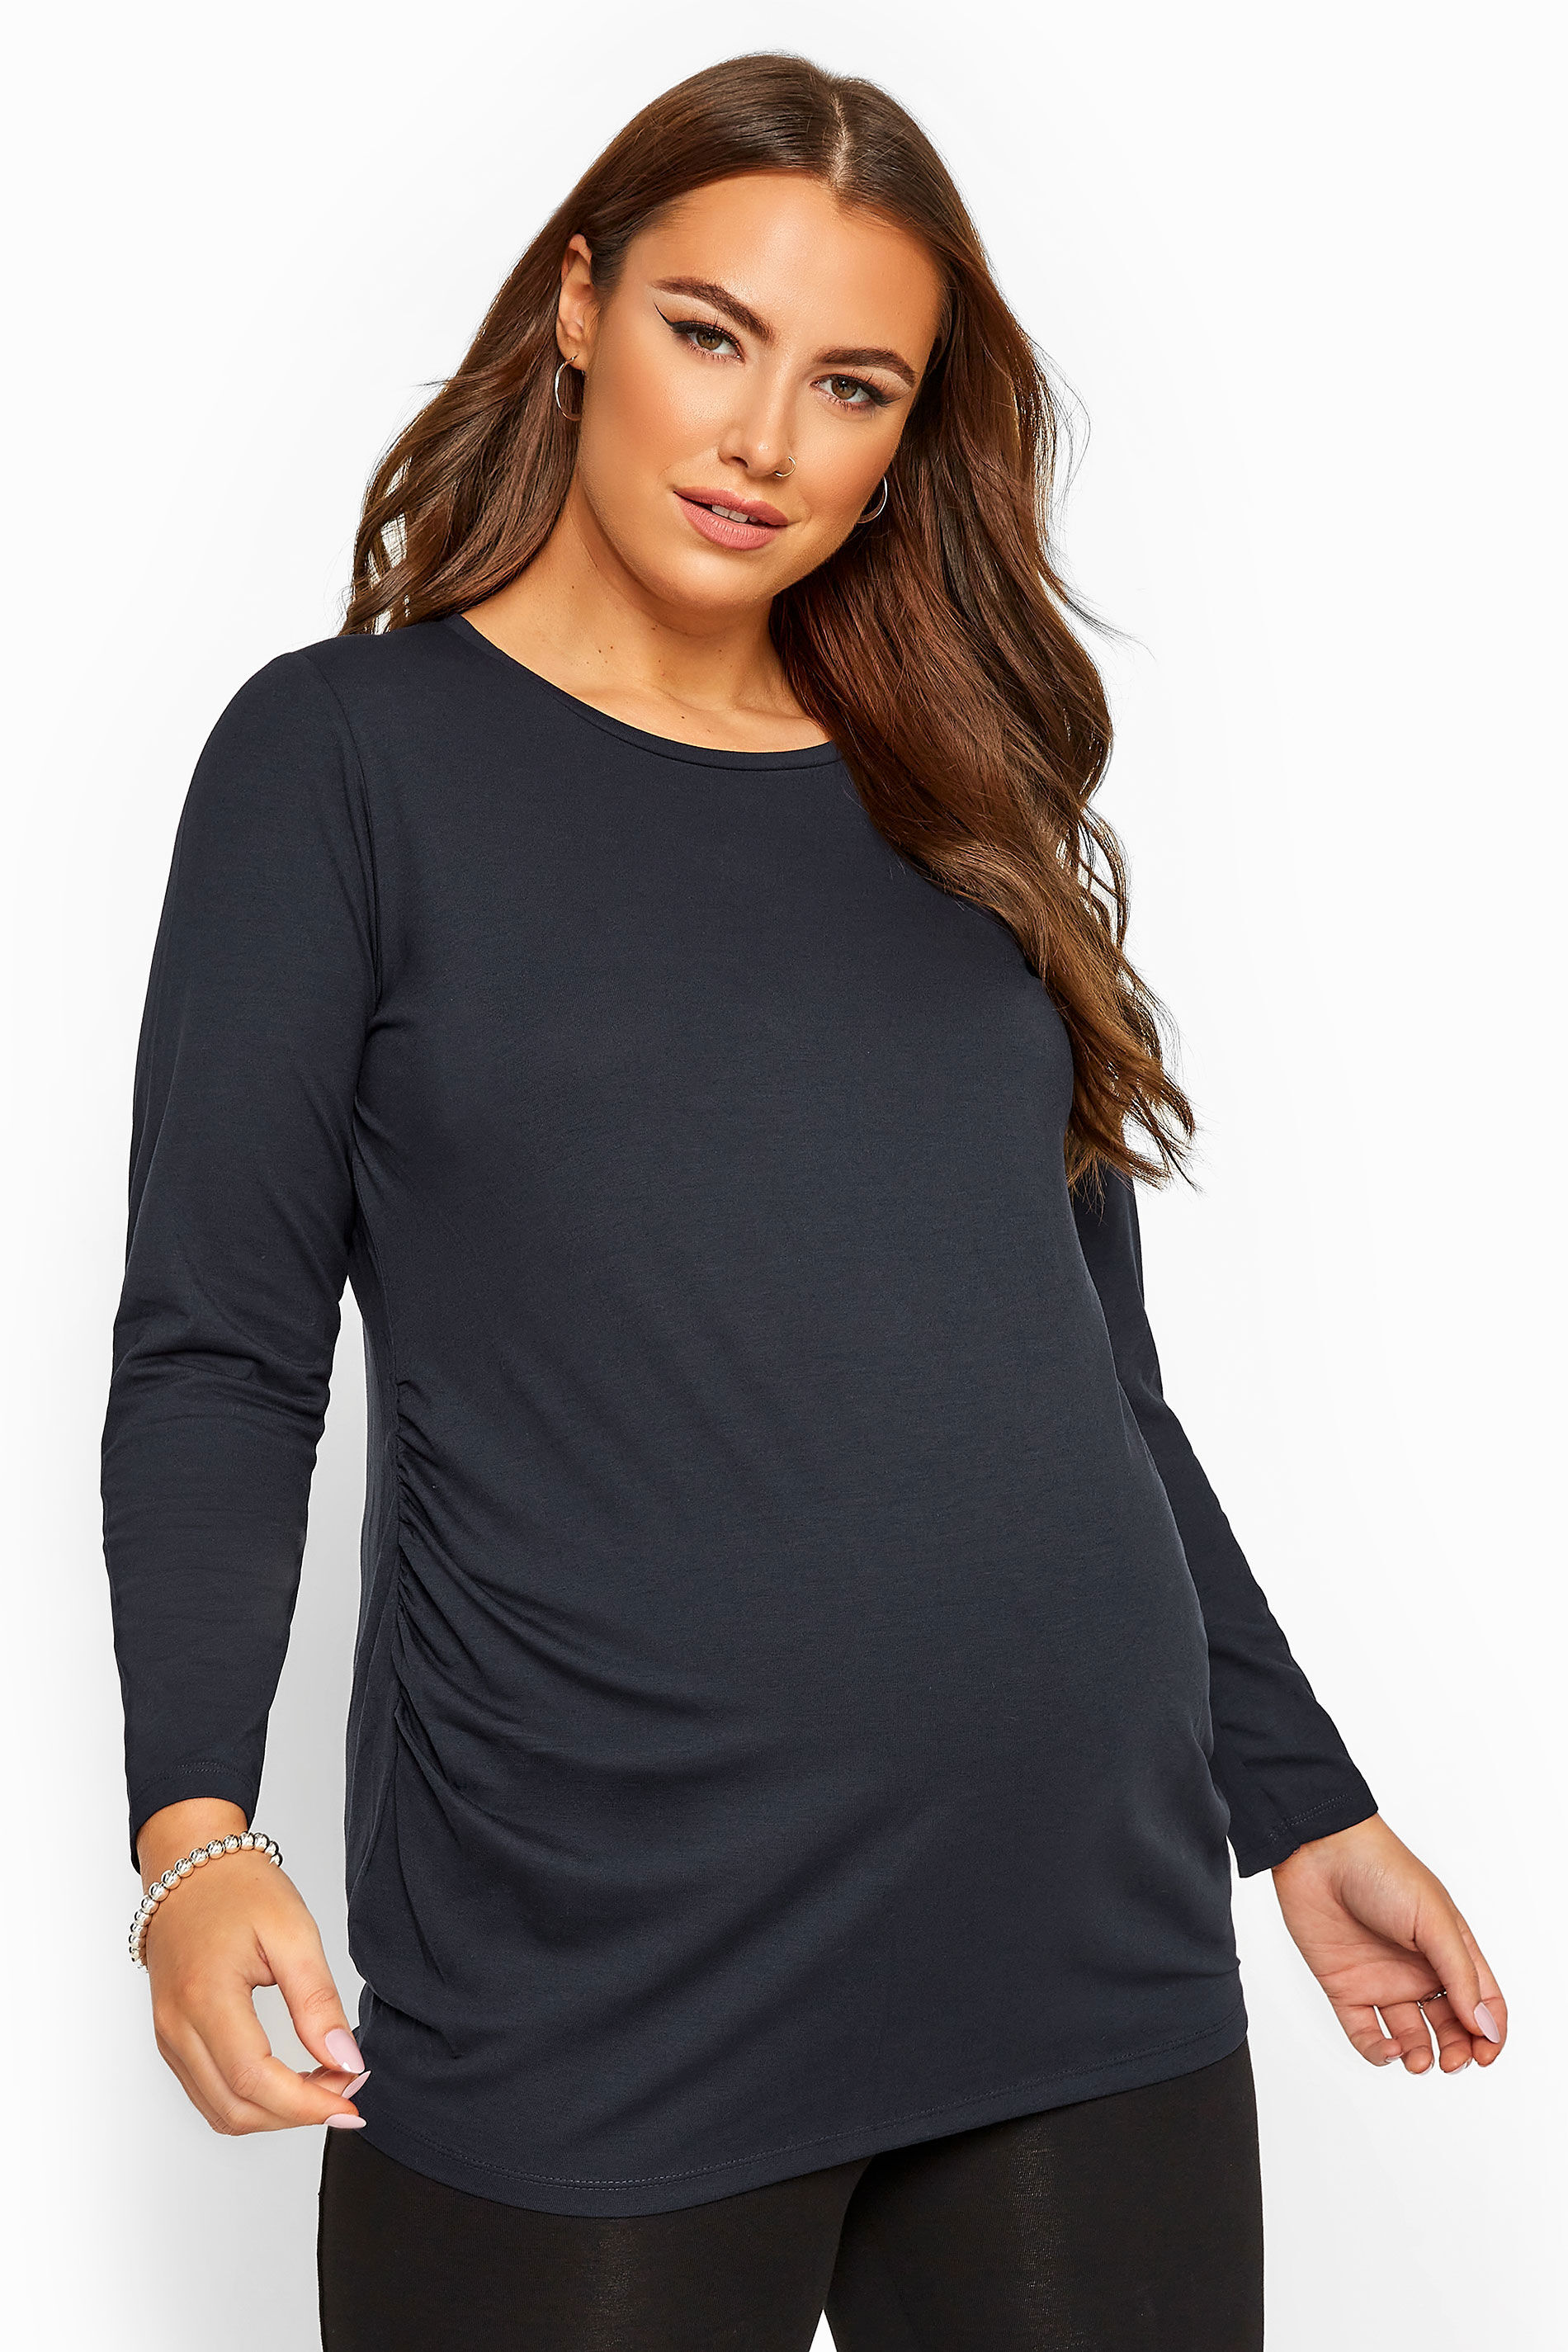 Yours Clothing Bump it up maternity navy long sleeve top